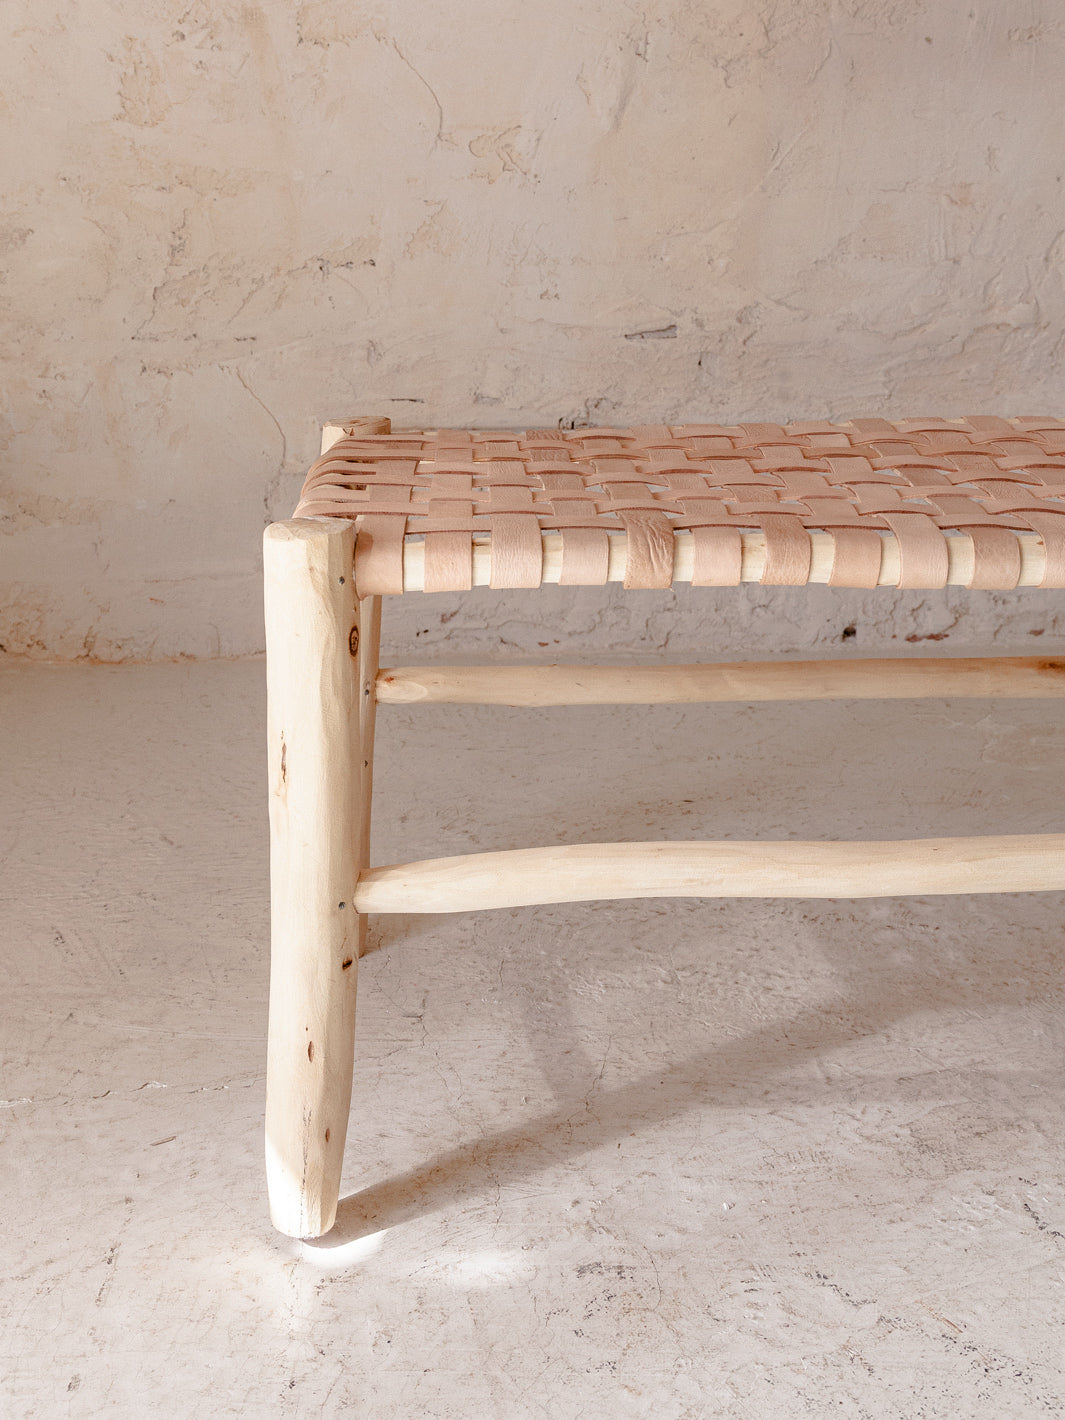 Olive tree artisan leather bench